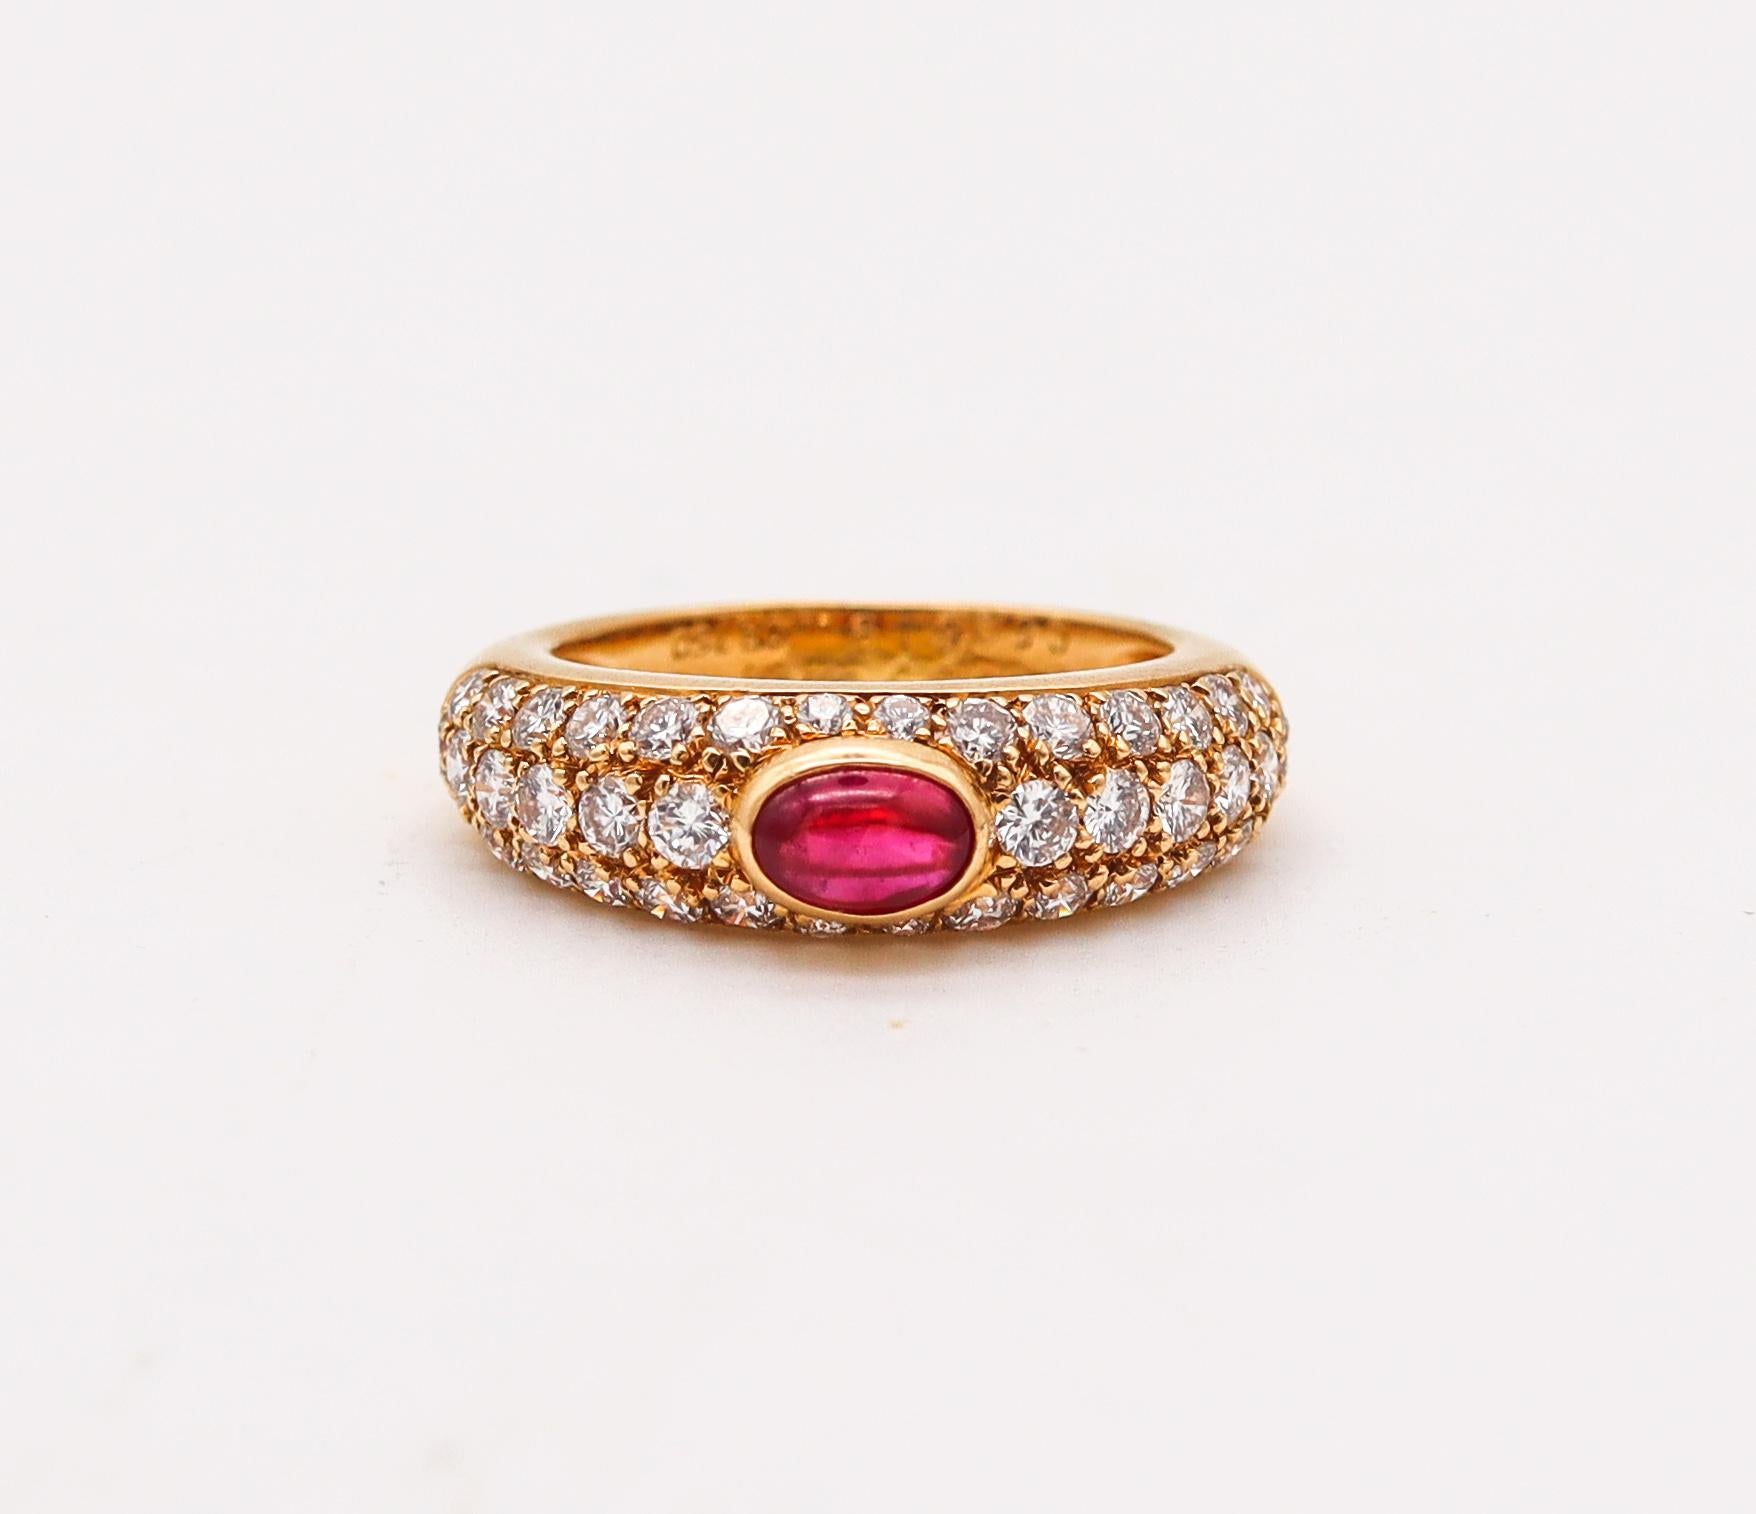 Brilliant Cut Cartier Paris Gems Set Ring in 18Kt Gold with 2.29 Cts Diamond and Burmese Ruby